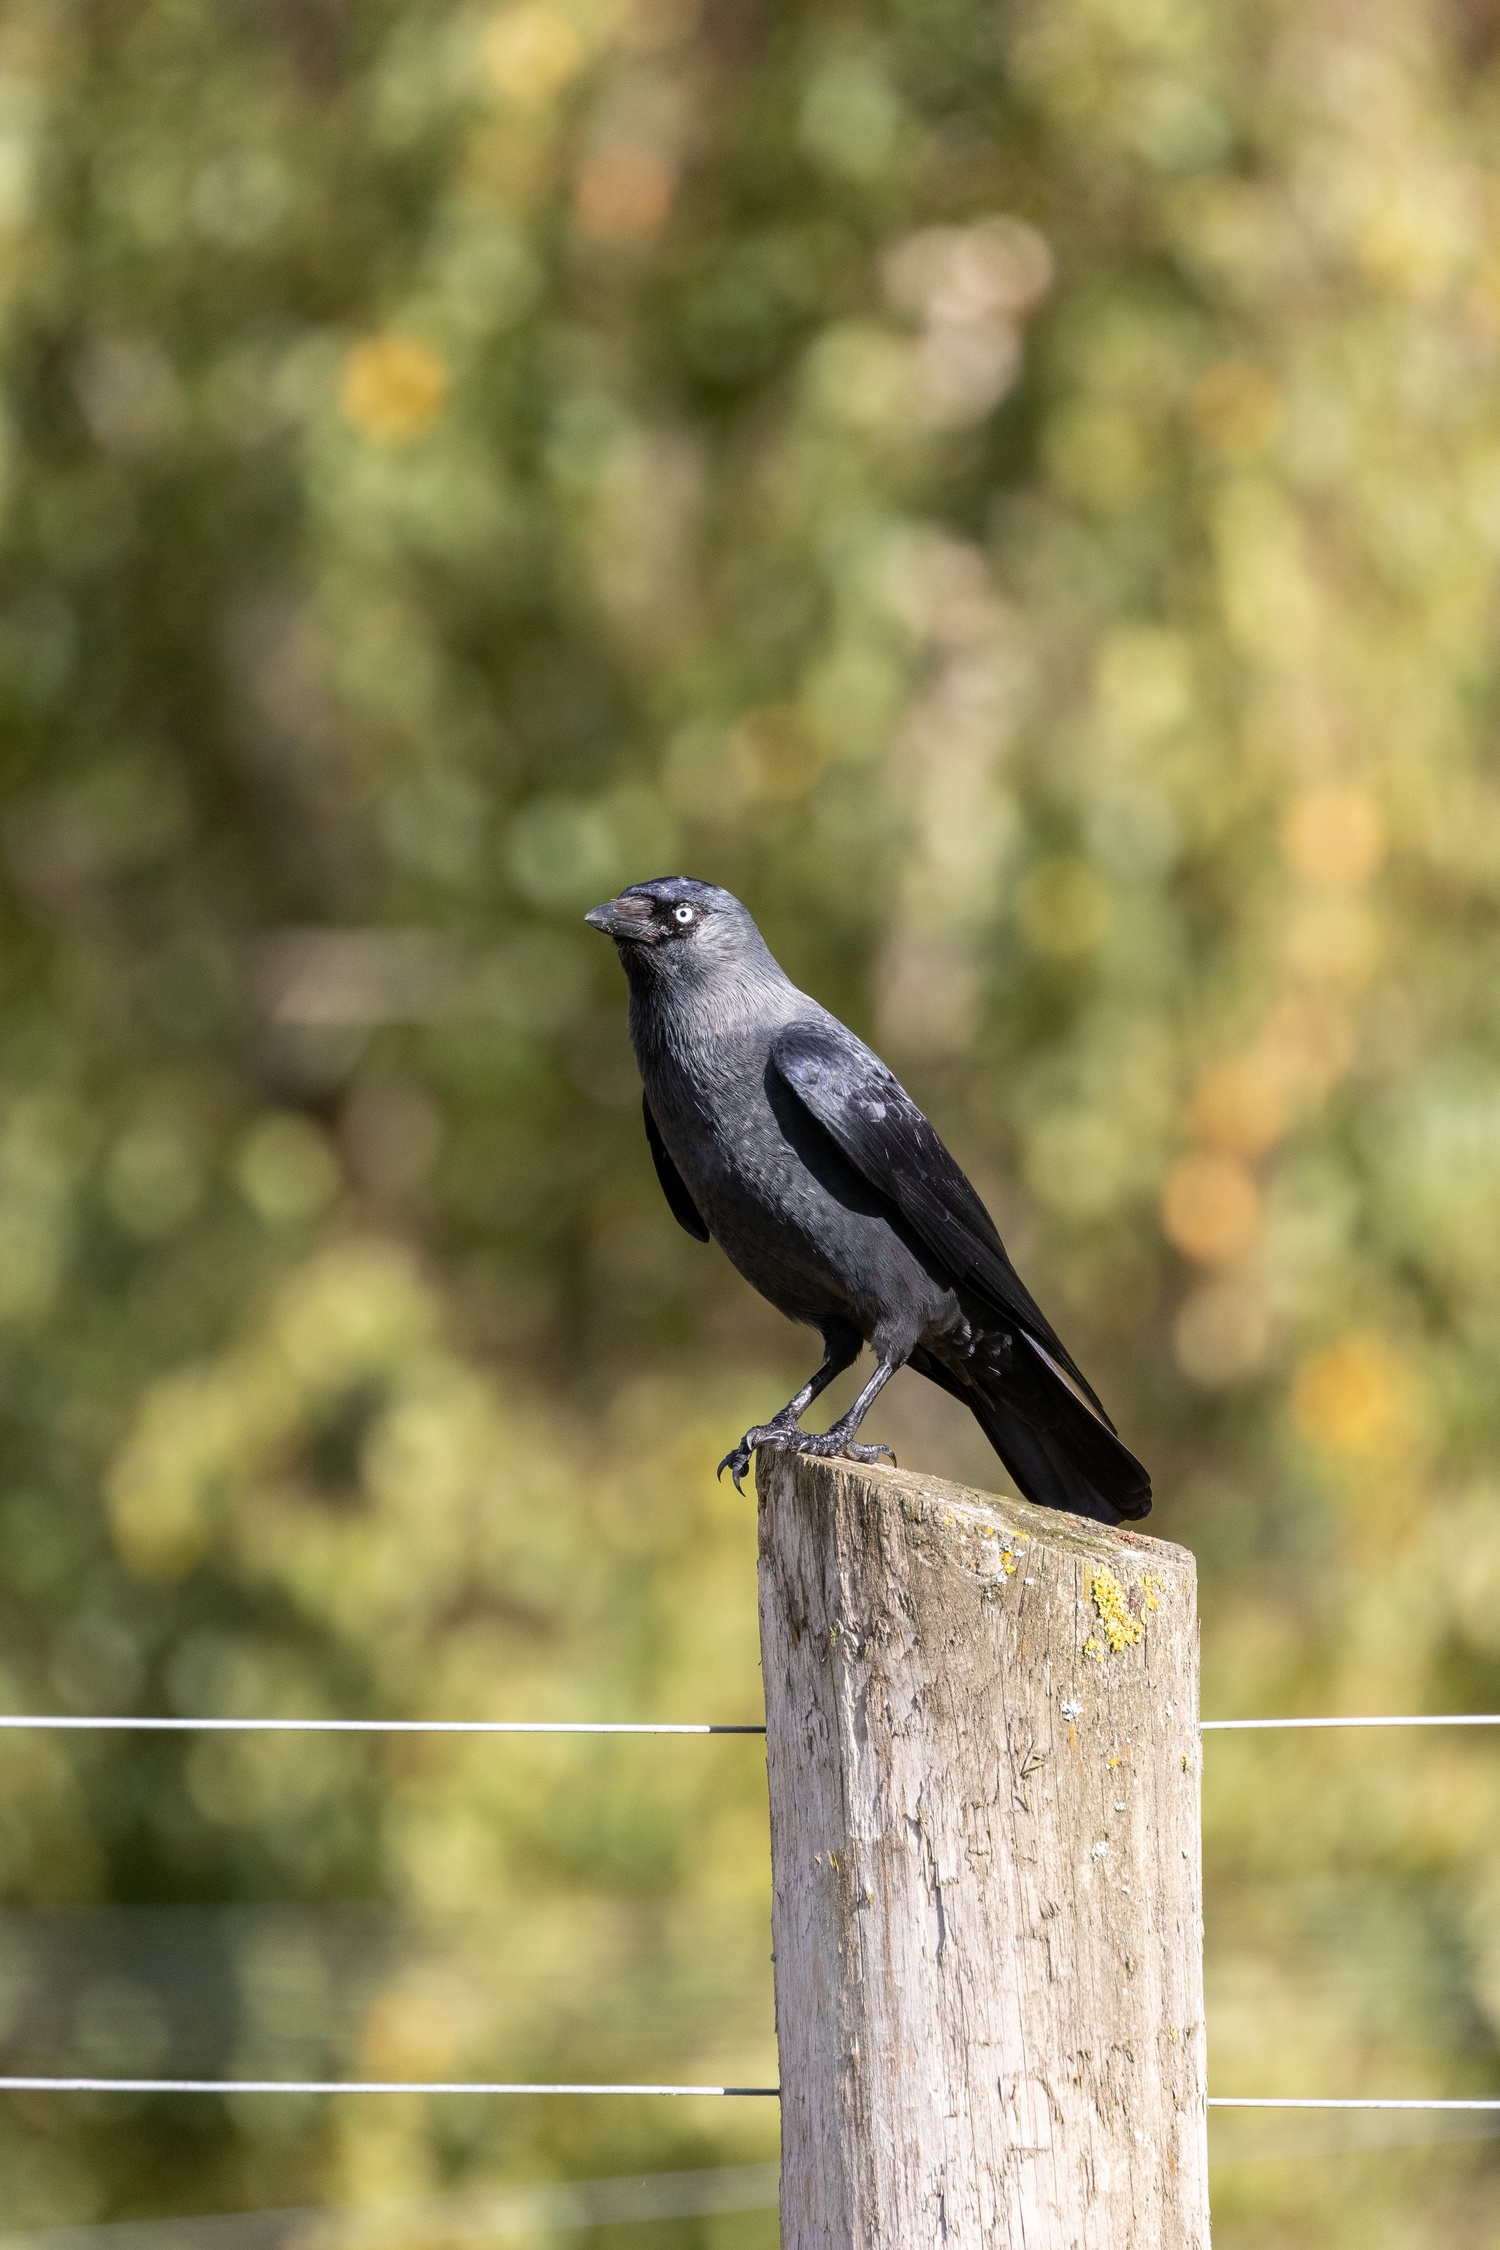 Jackdaw on a fence post with out of focus trees in the background